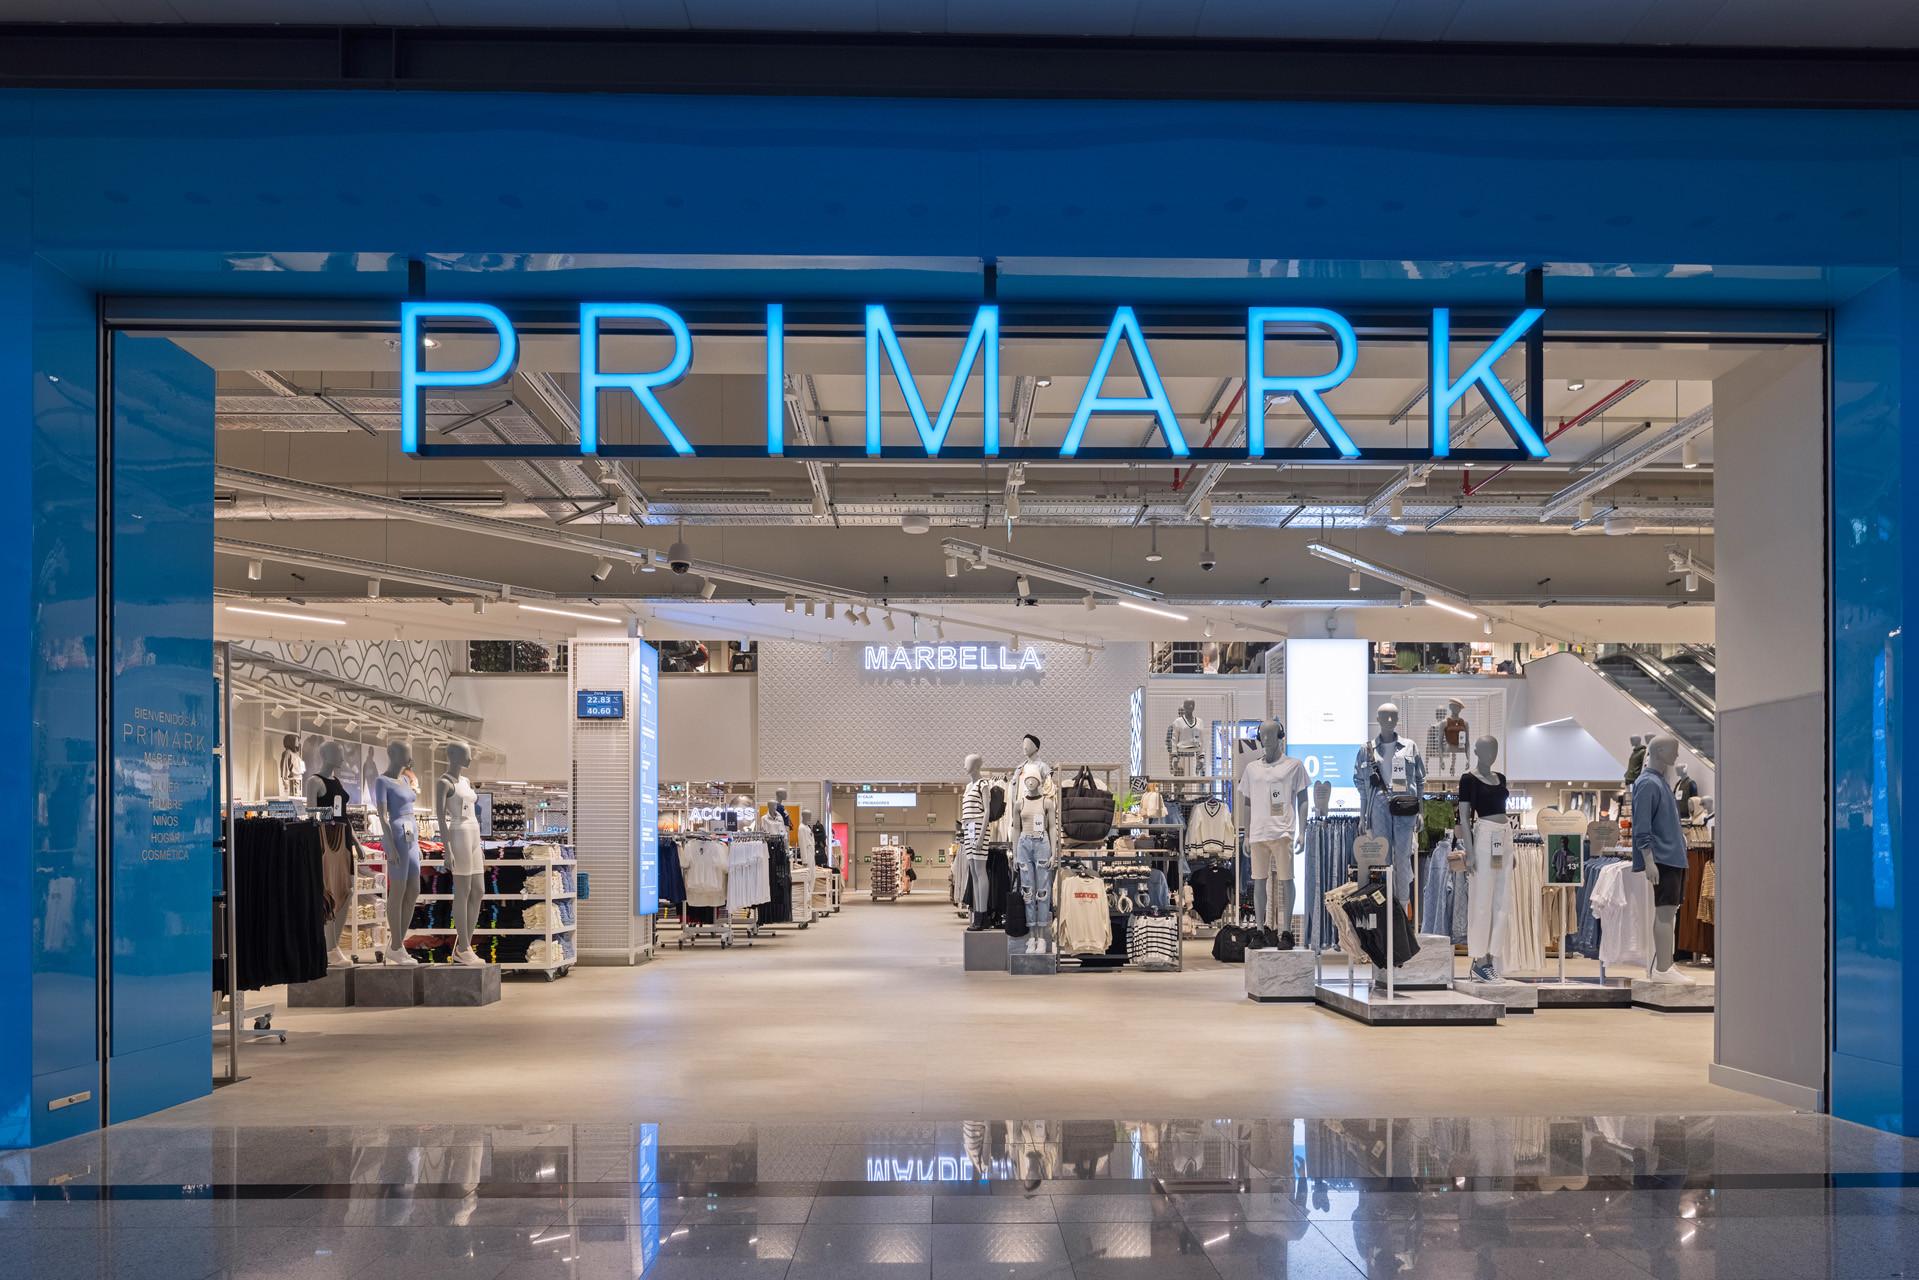 Primark to invest £100m into UK stores | Retail Sector